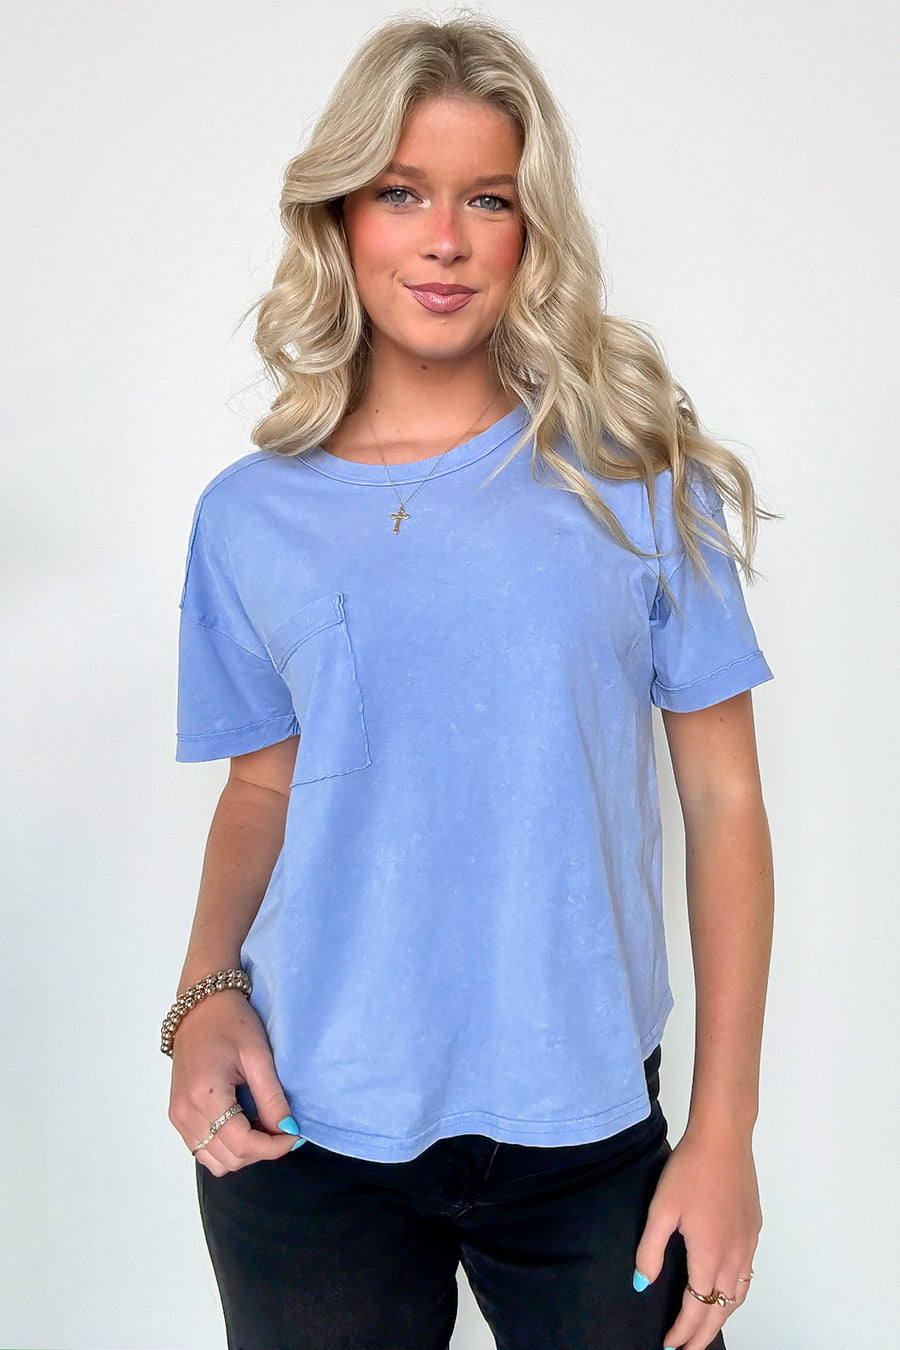 Blue / S Keshia Mineral Washed Short Sleeve Top - BACK IN STOCK - Madison and Mallory